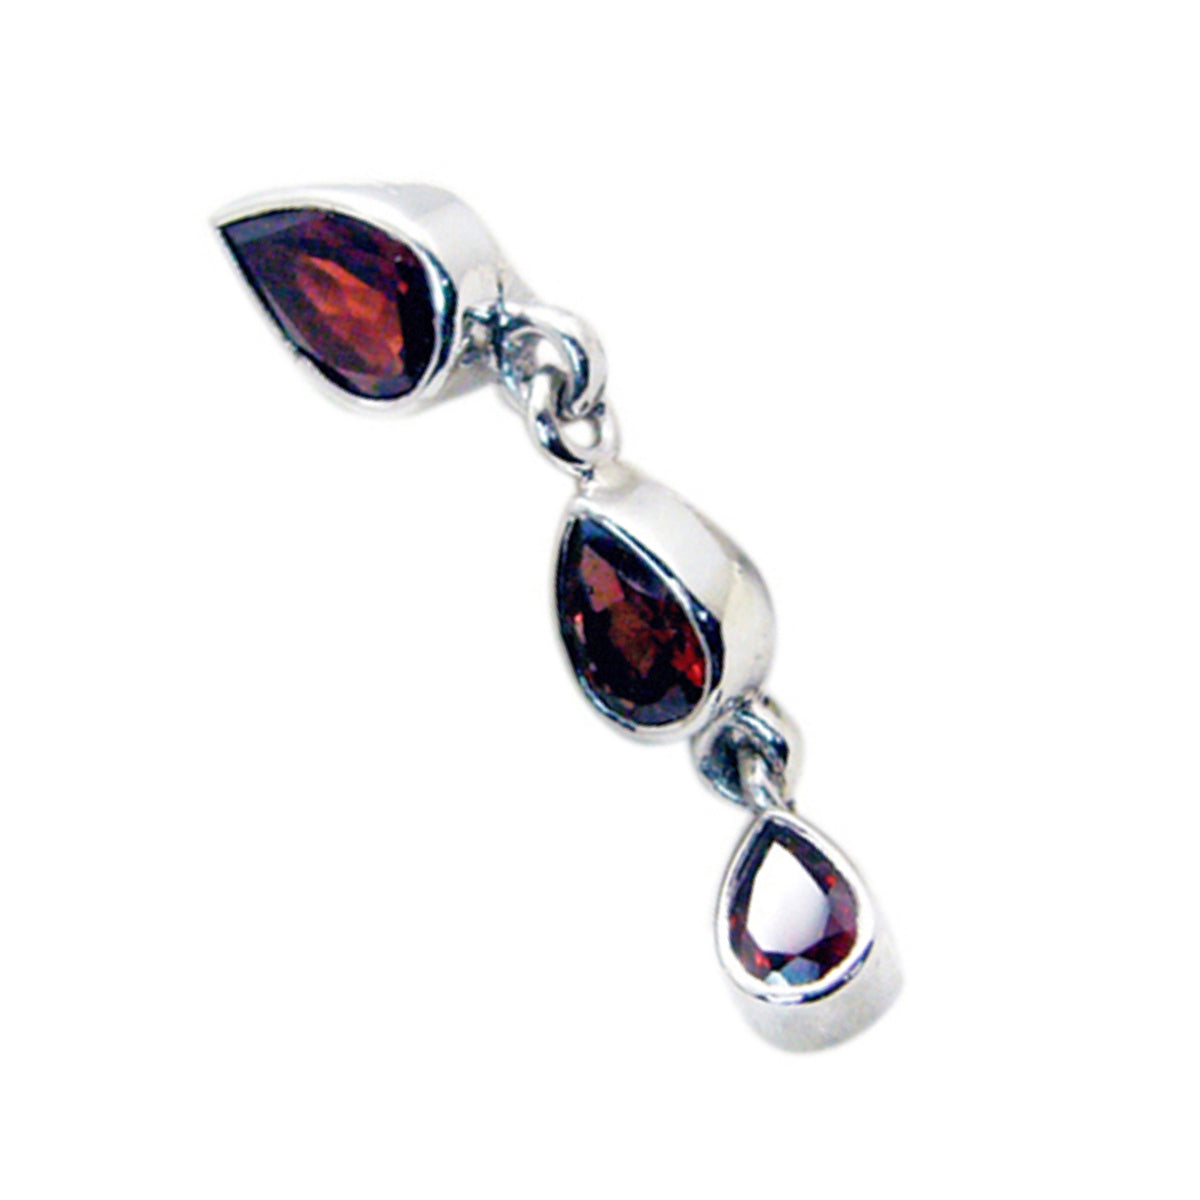 Riyo Winsome Gems Pear Faceted Red Garnet Solid Silver Pendant Gift For Easter Sunday